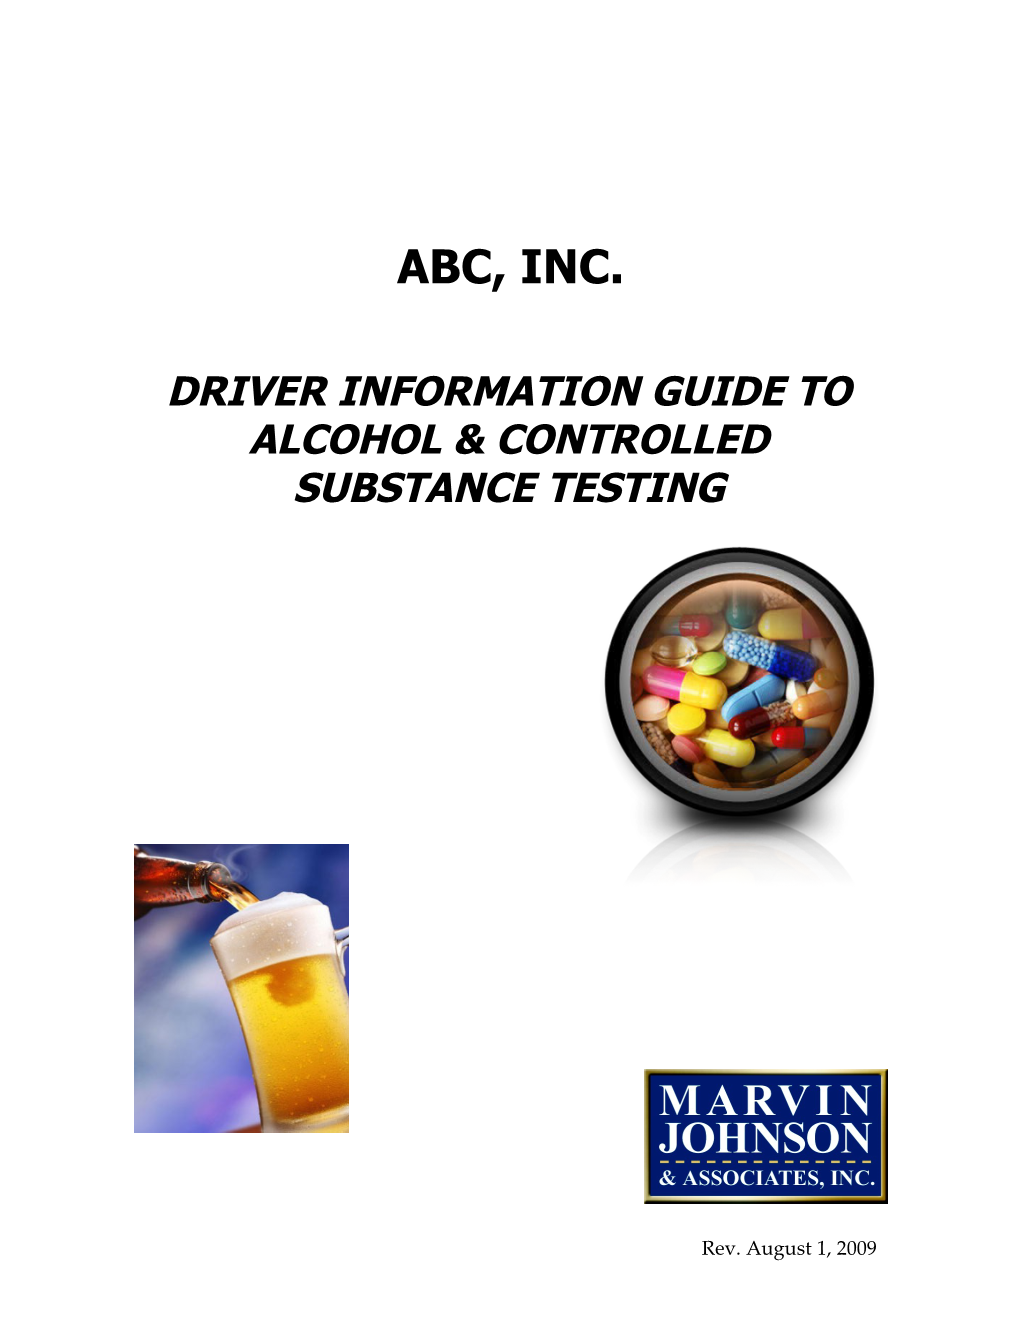 Driver Information Guide to Alcohol & Controlled Substance Testing